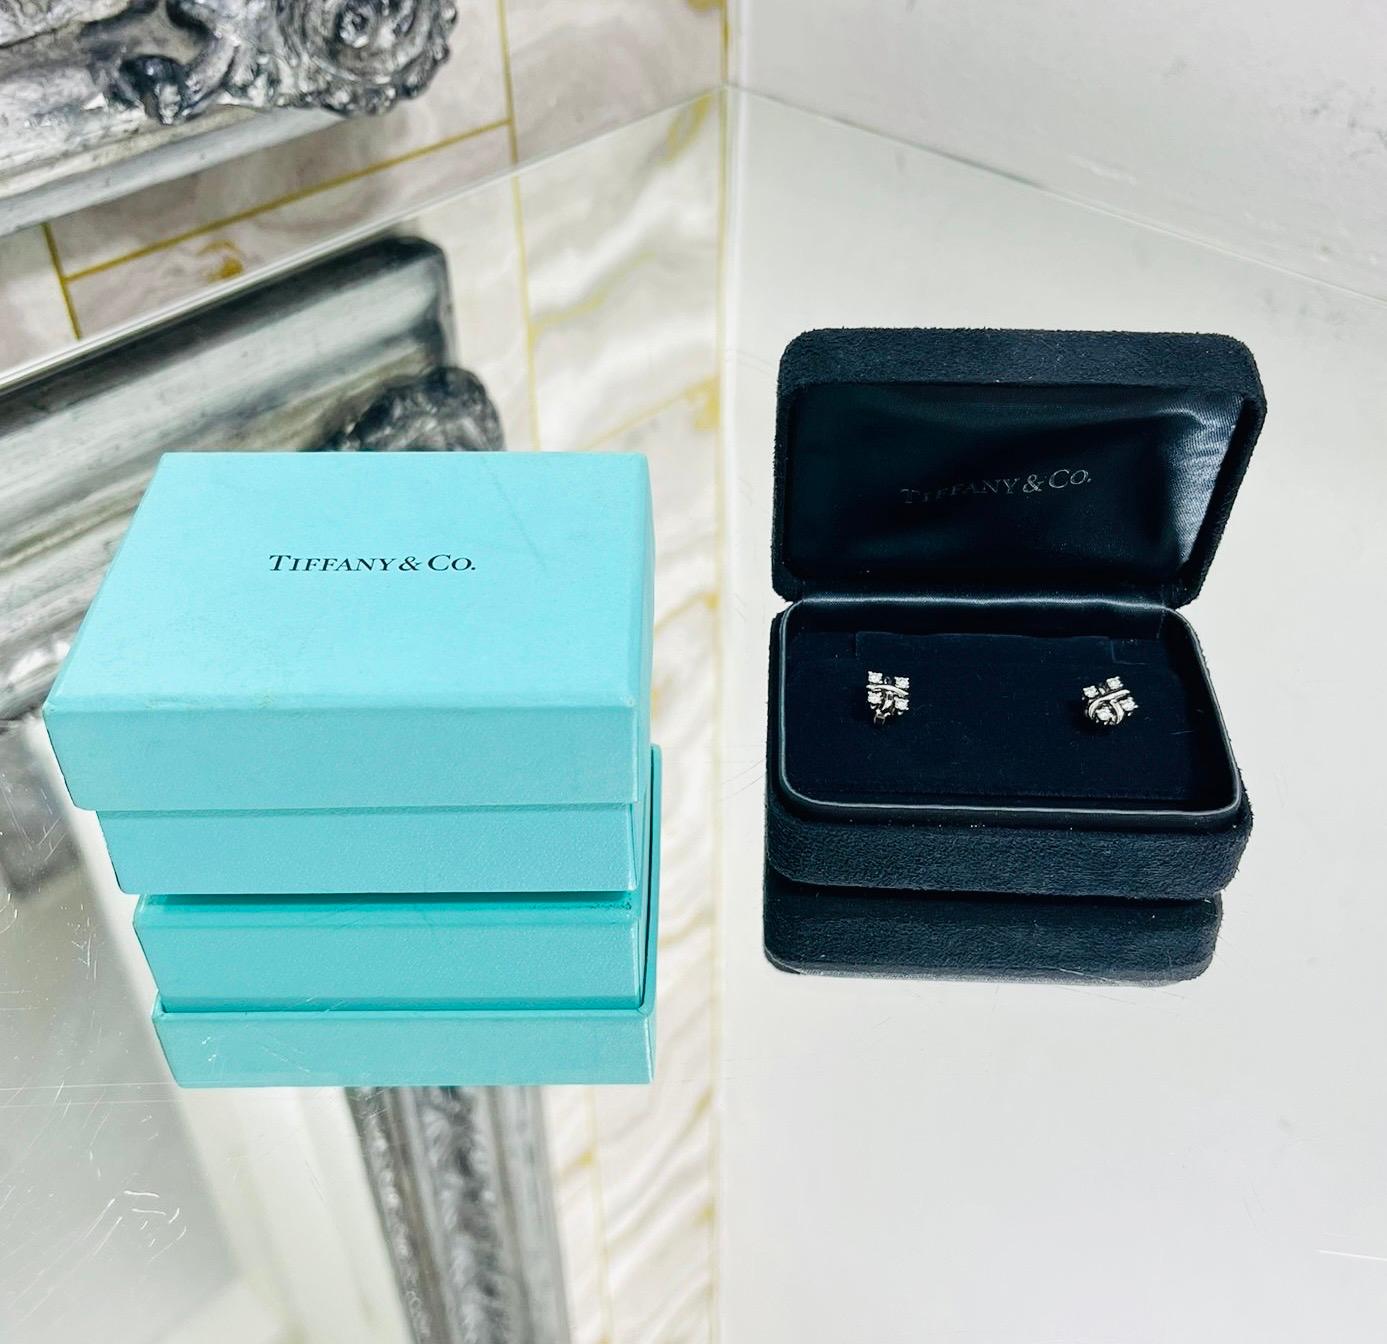 Current Season - Tiffany & Co Platinum Diamond Schlumberger Lynn Earrings

Platinum earrings designed by Schlumberger formed of wavy X shape with tapering ends.

Detailed with four round brilliant cut diamonds and butterfly closure. Rrp £4,075

Size